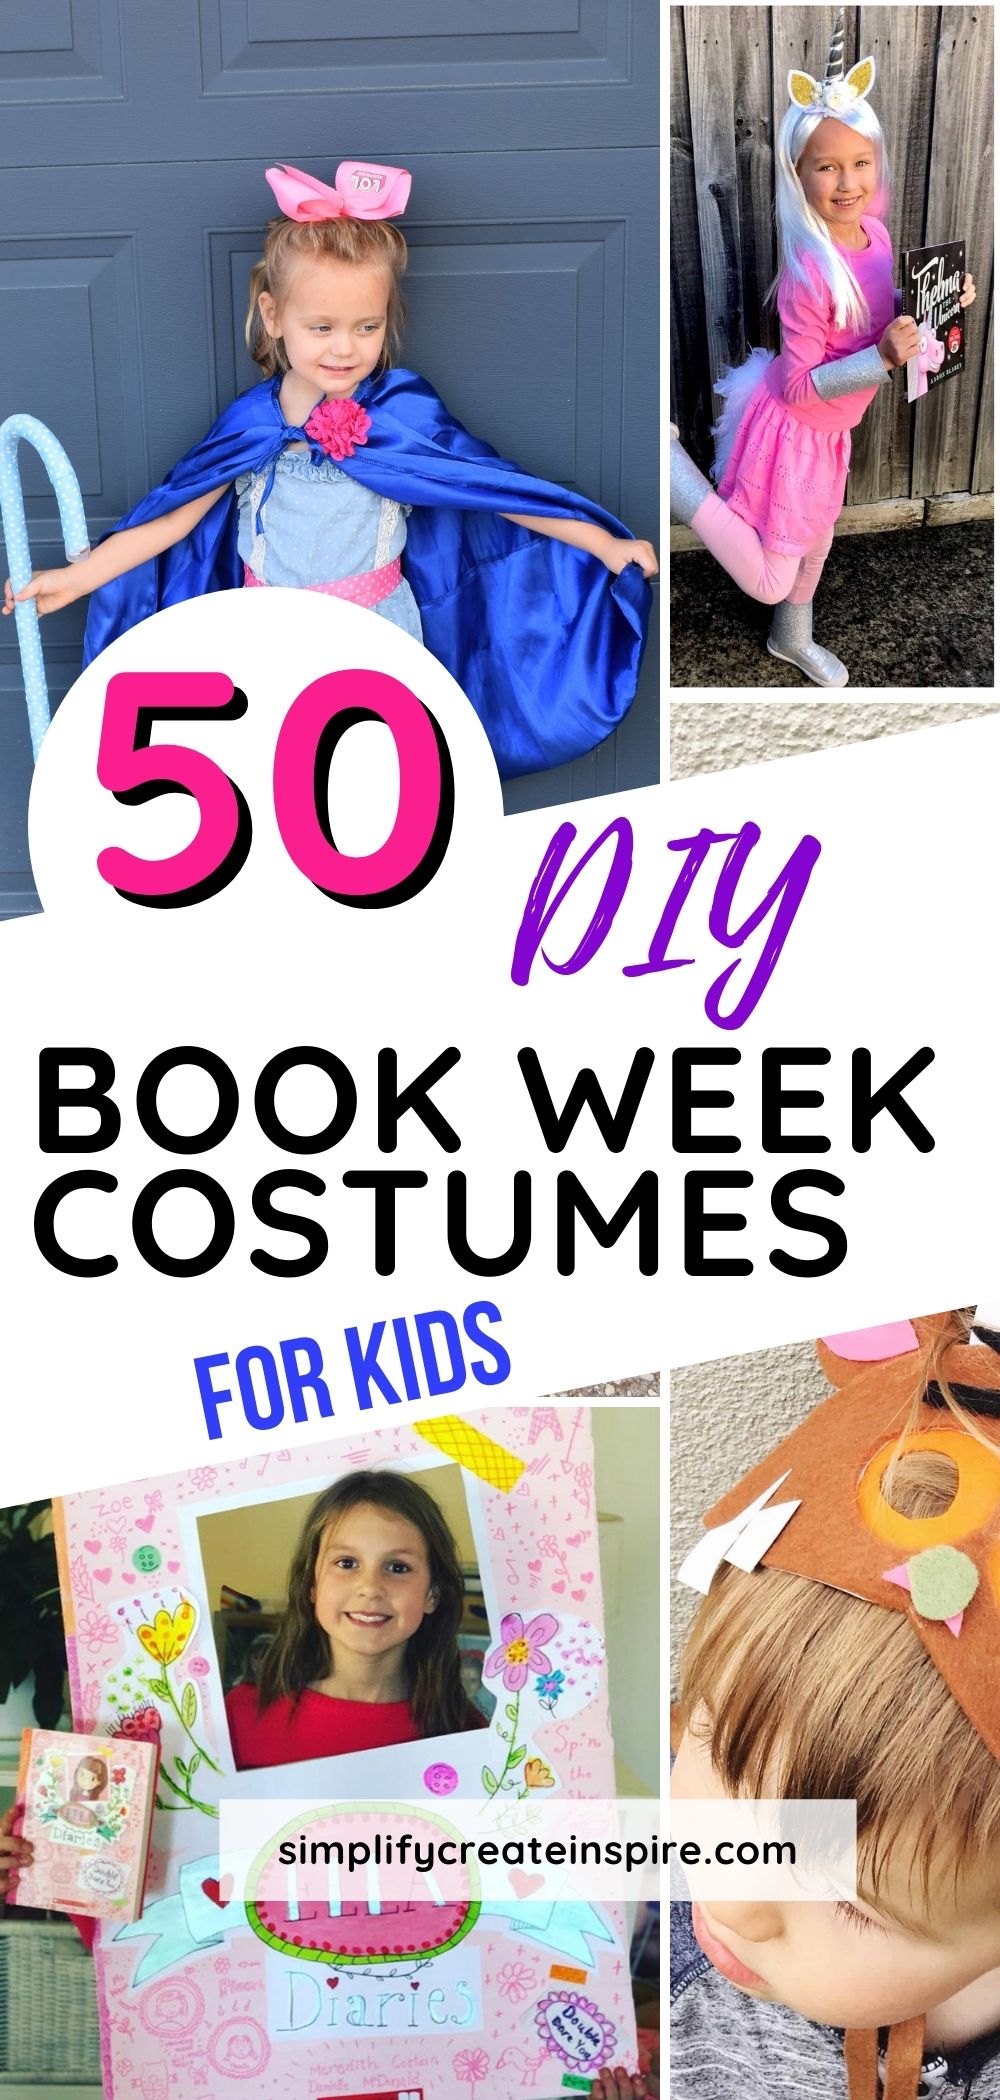 book character day ideas for boys